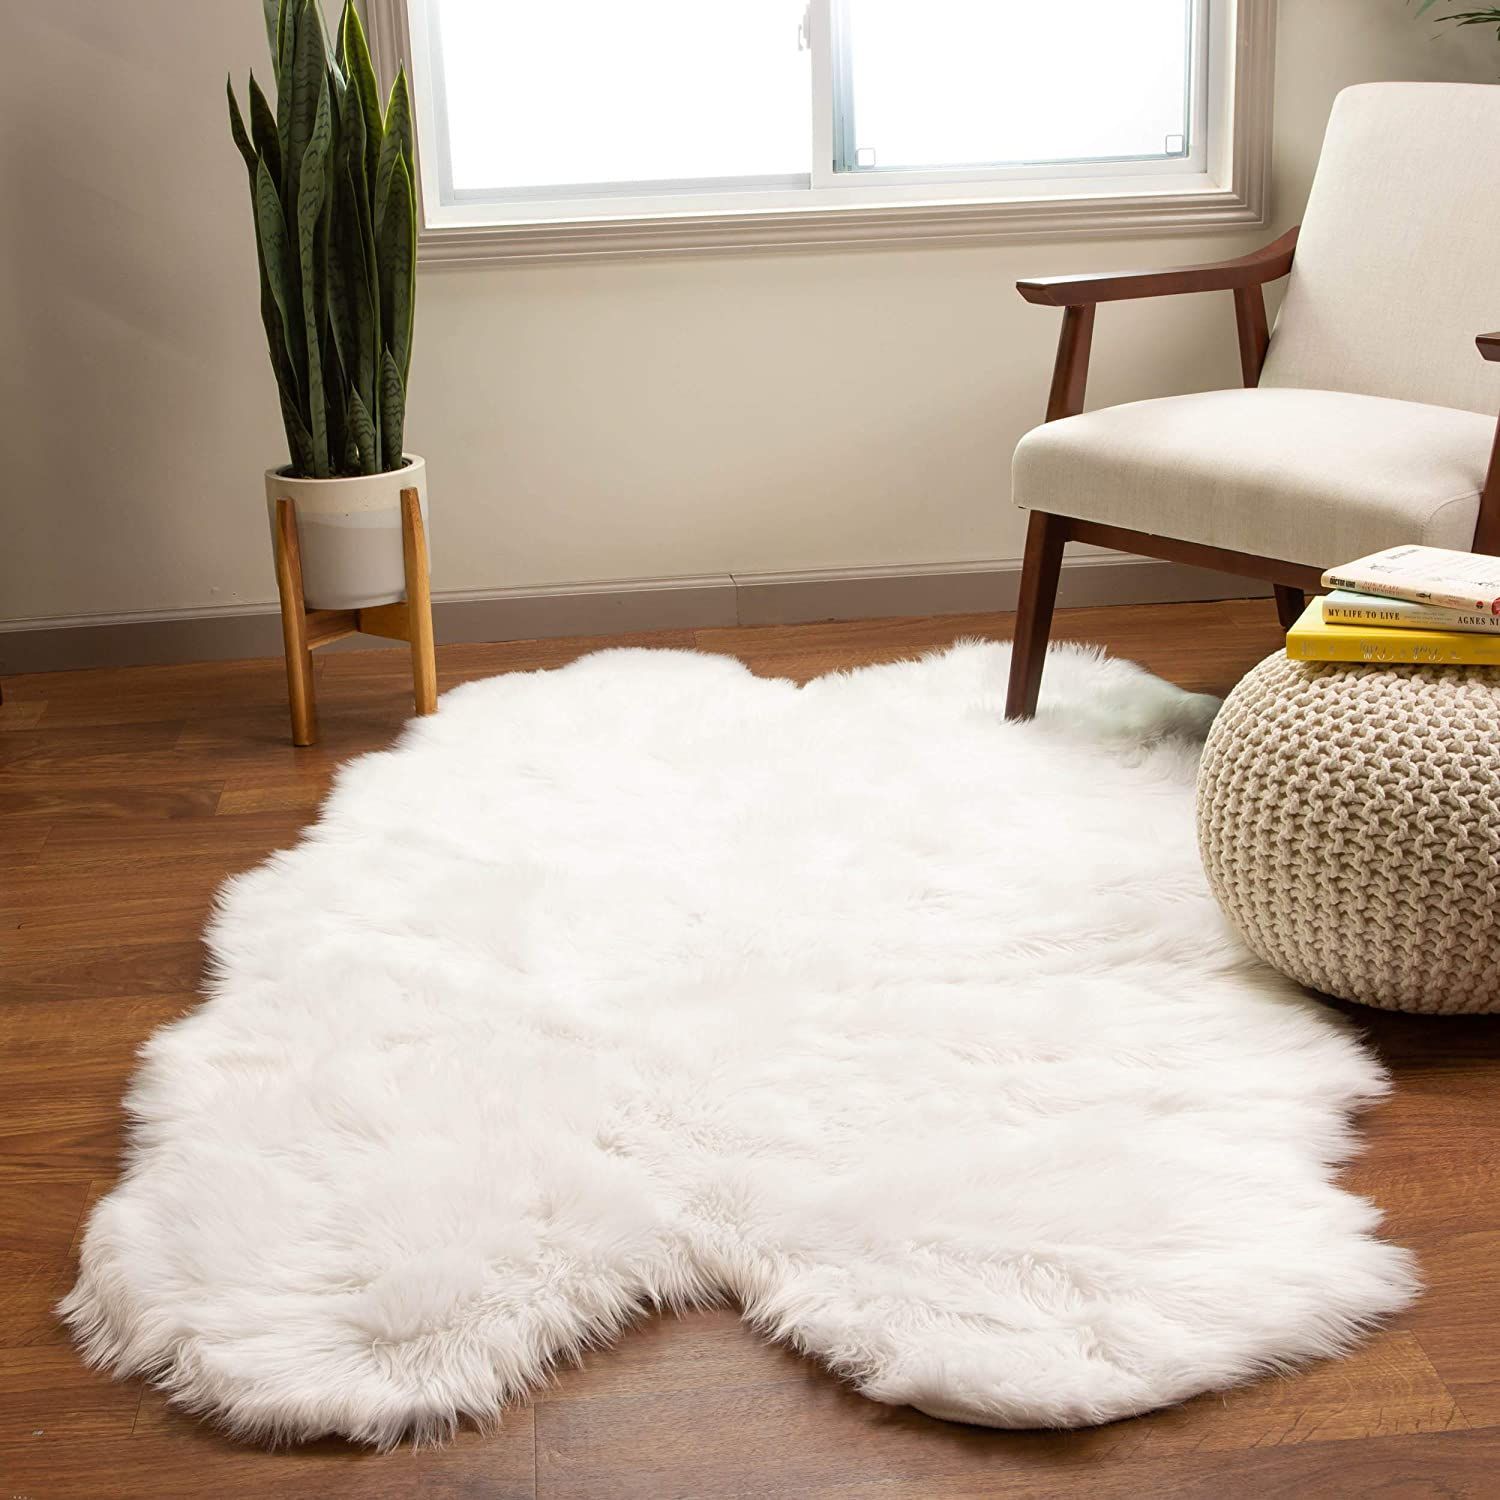 Soft Area Rugs To Make Your Home Cozy, Large Round Faux Fur Rug